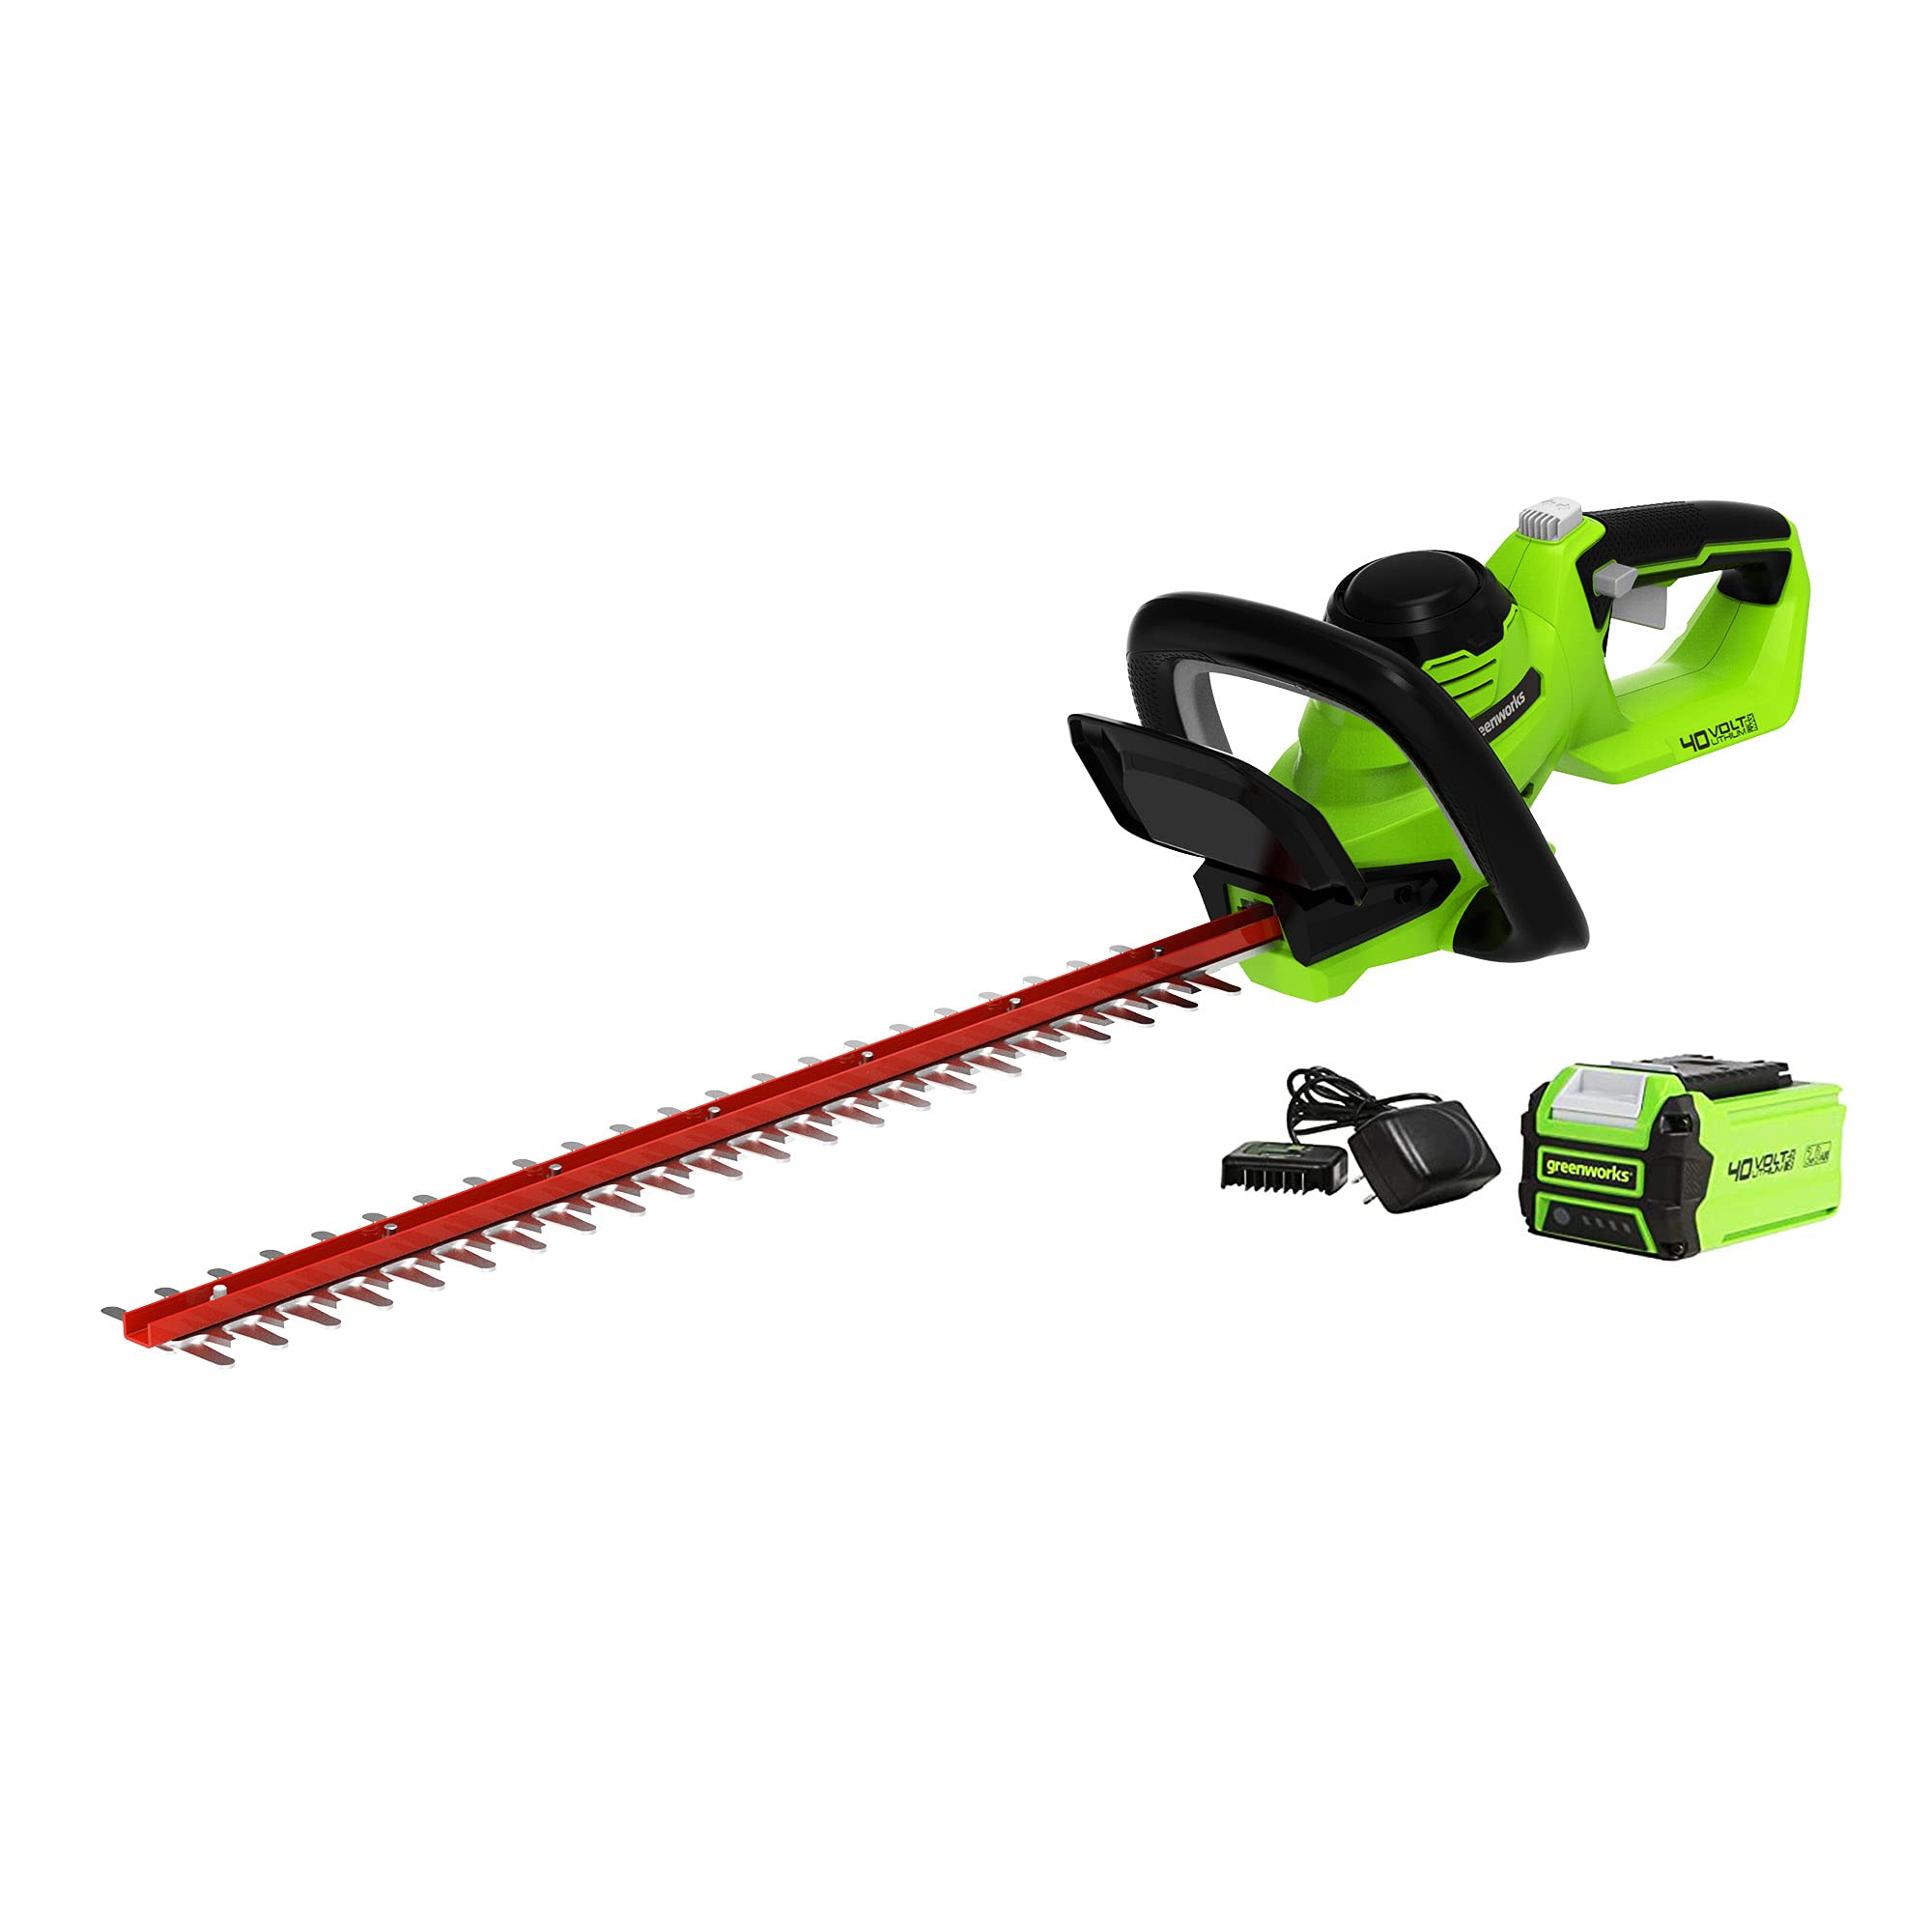 24" 40V Greenworks Cordless Hedge Trimmer w/ 2.0Ah USB Battery & Charger Kit $108.30 + Free Shipping